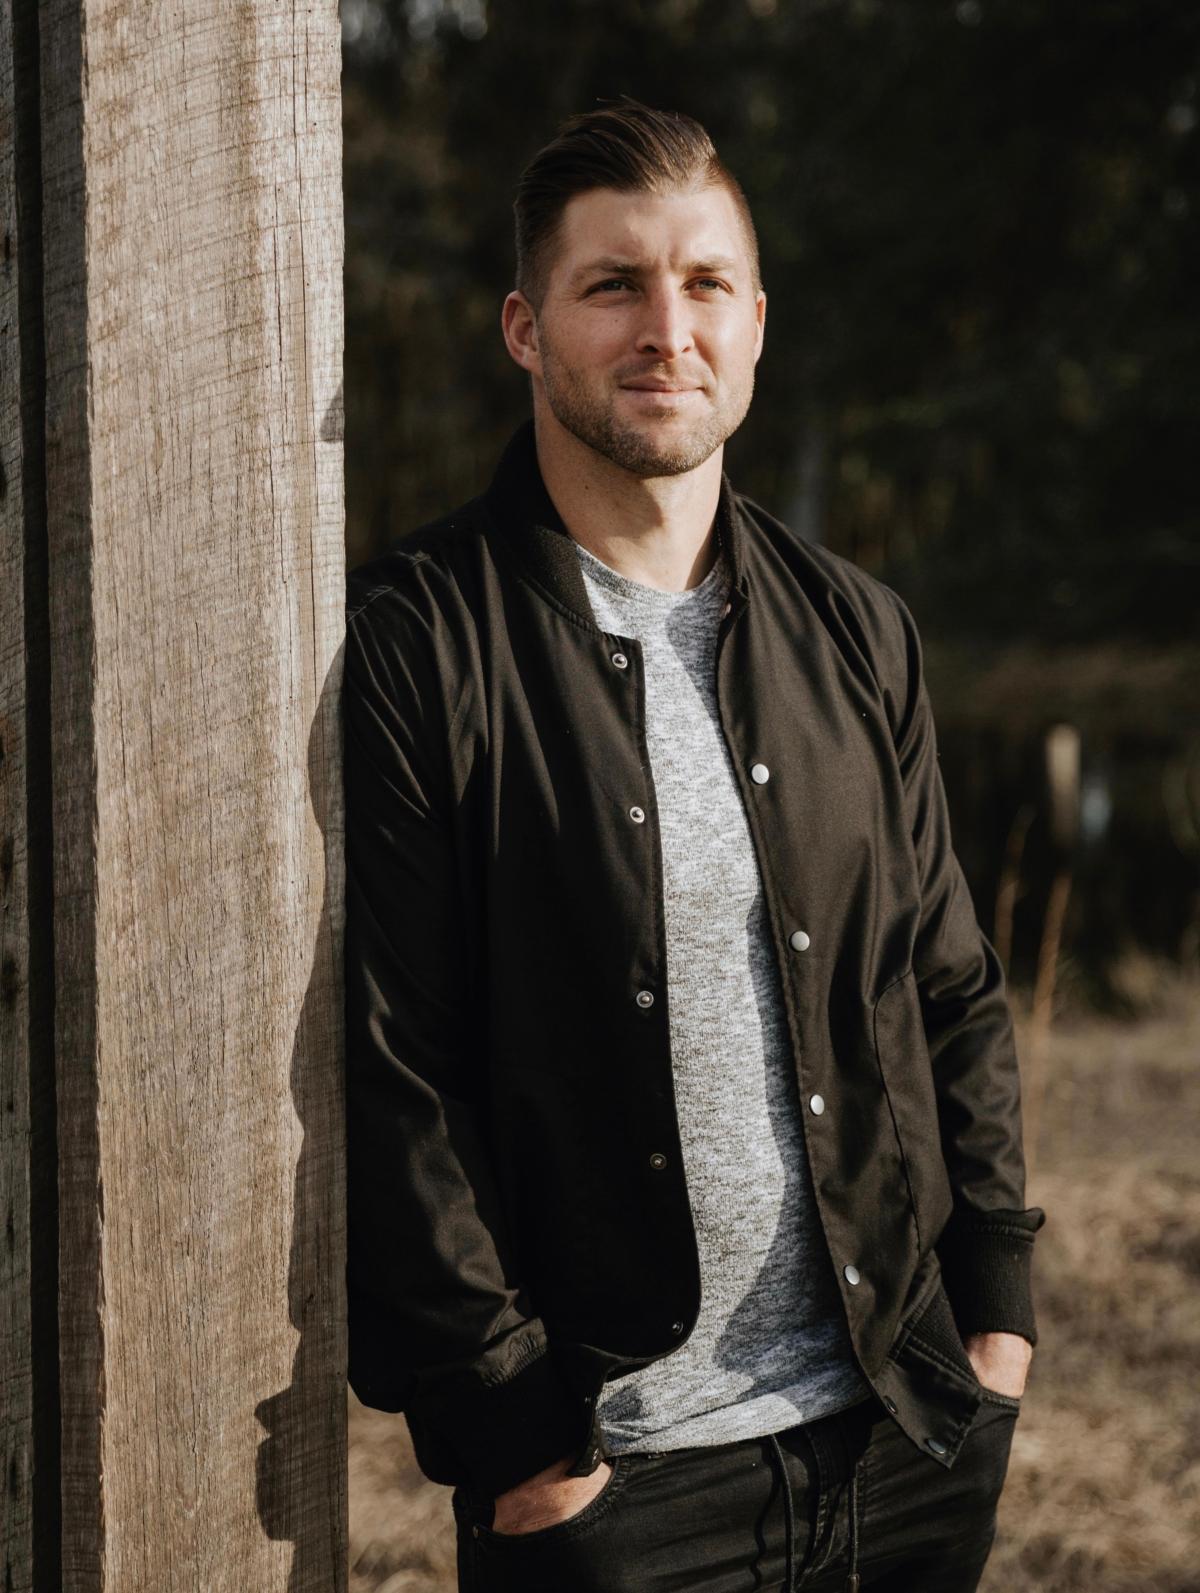 Tebow is also passionate about faith-based content for children and has invested in different media projects. (Adam Szarmack)